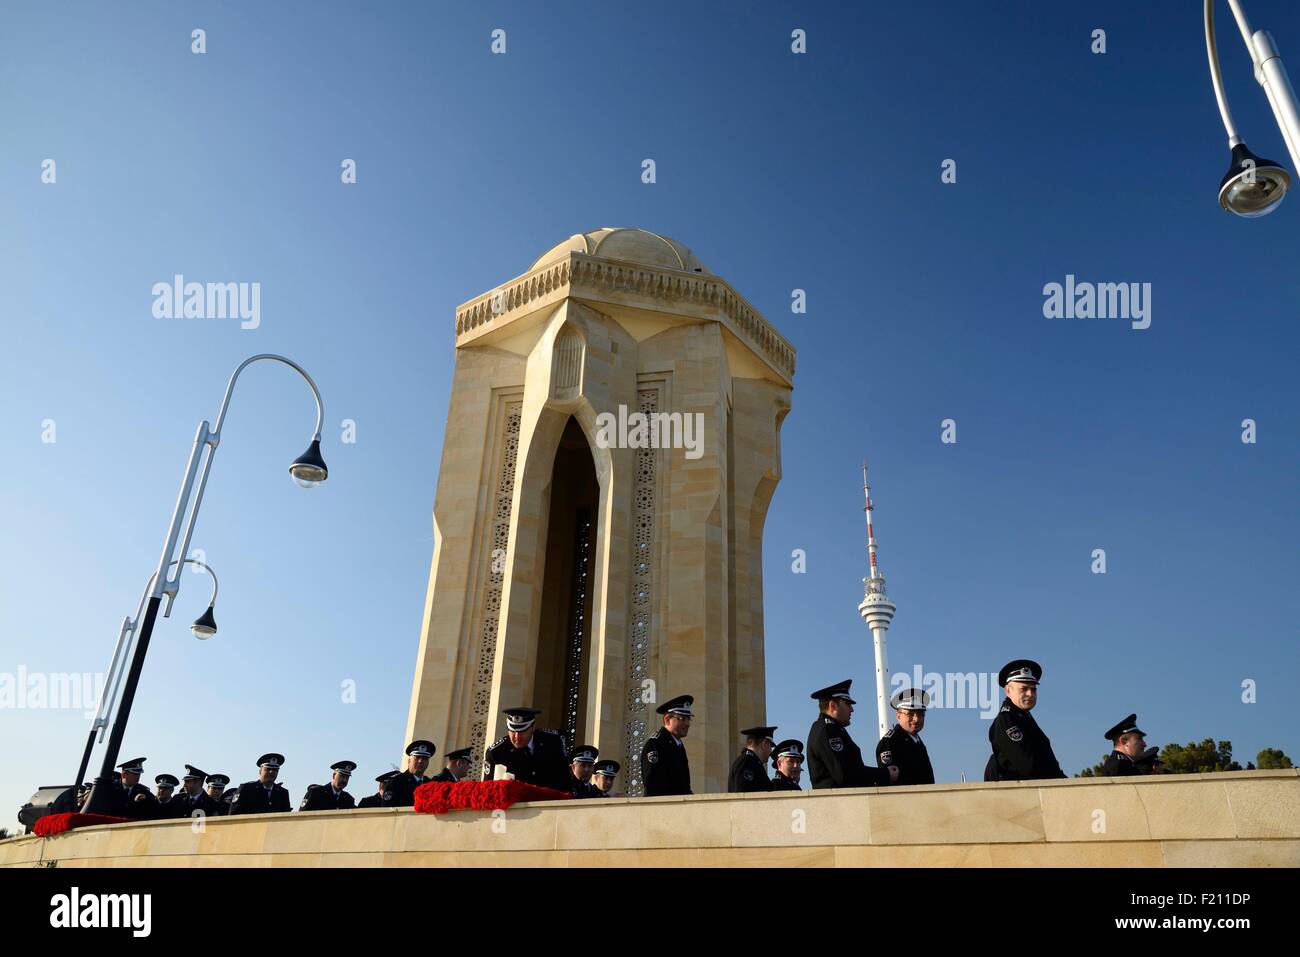 Azerbaijan, Baku, Martyrs' Lane (Alley of Martyrs), Eternal Flame memorial dedicated to those killed by the soviet army during Black January on 20-01-1990 and later to those killed in Nagorno-Karabakh war, military ceremony during the 25th Martyrs' Day co Stock Photo